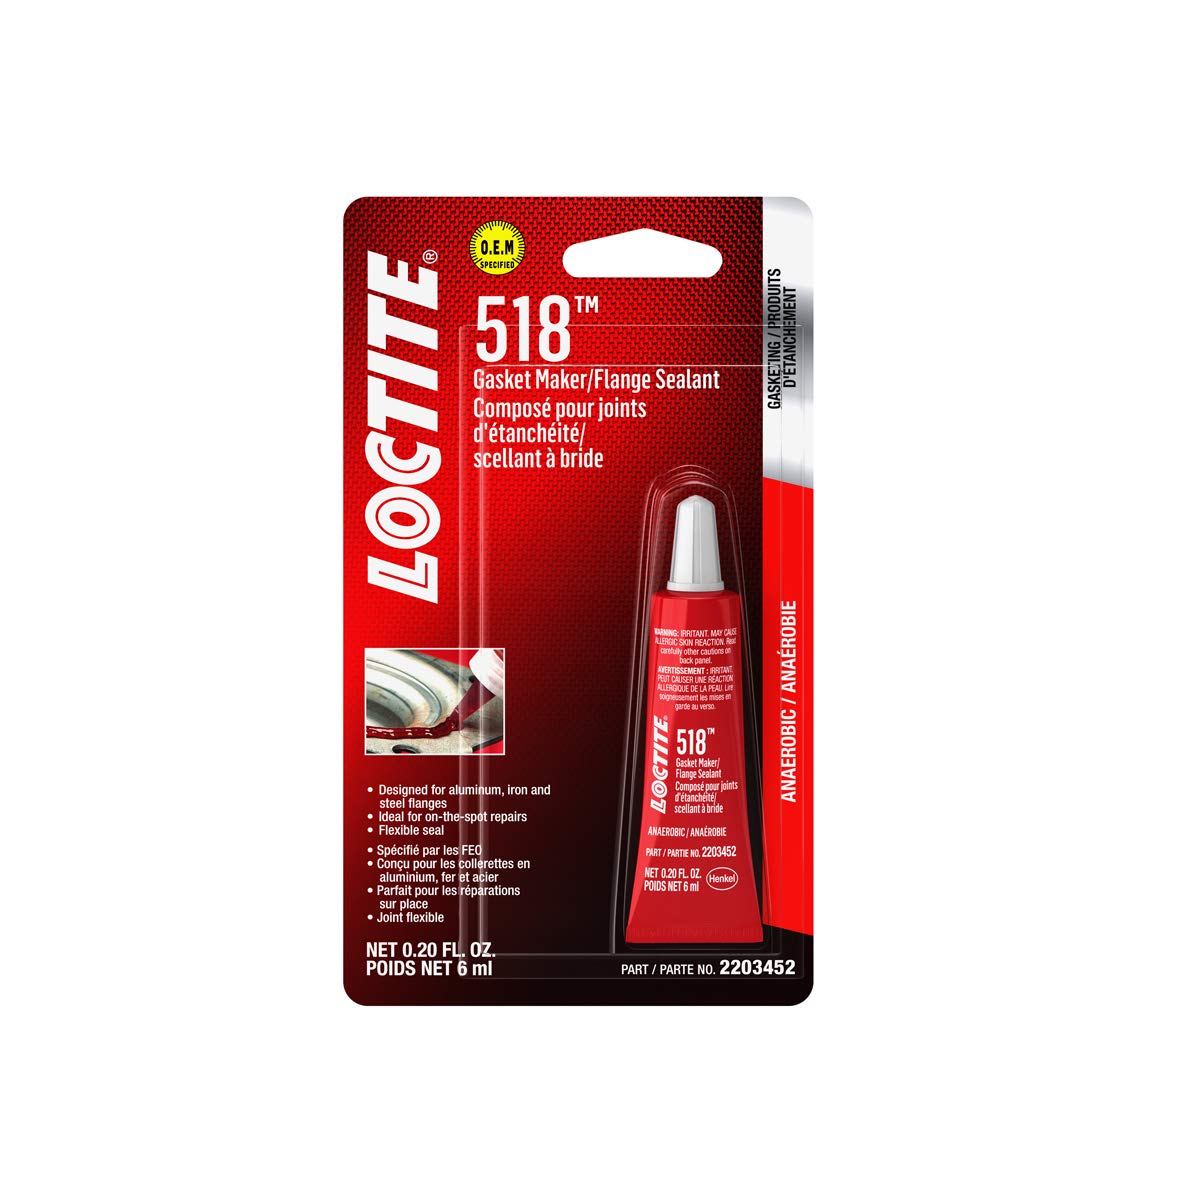 LOCTITE 518 Gasket Maker & Flange Sealant for Automotive: Anaerobic, Medium-Strength, Non-Corrosive, Flexes with Movement, Solvent-Resistant | Red, 6 ml Tube (PN: 2203452-2096064)